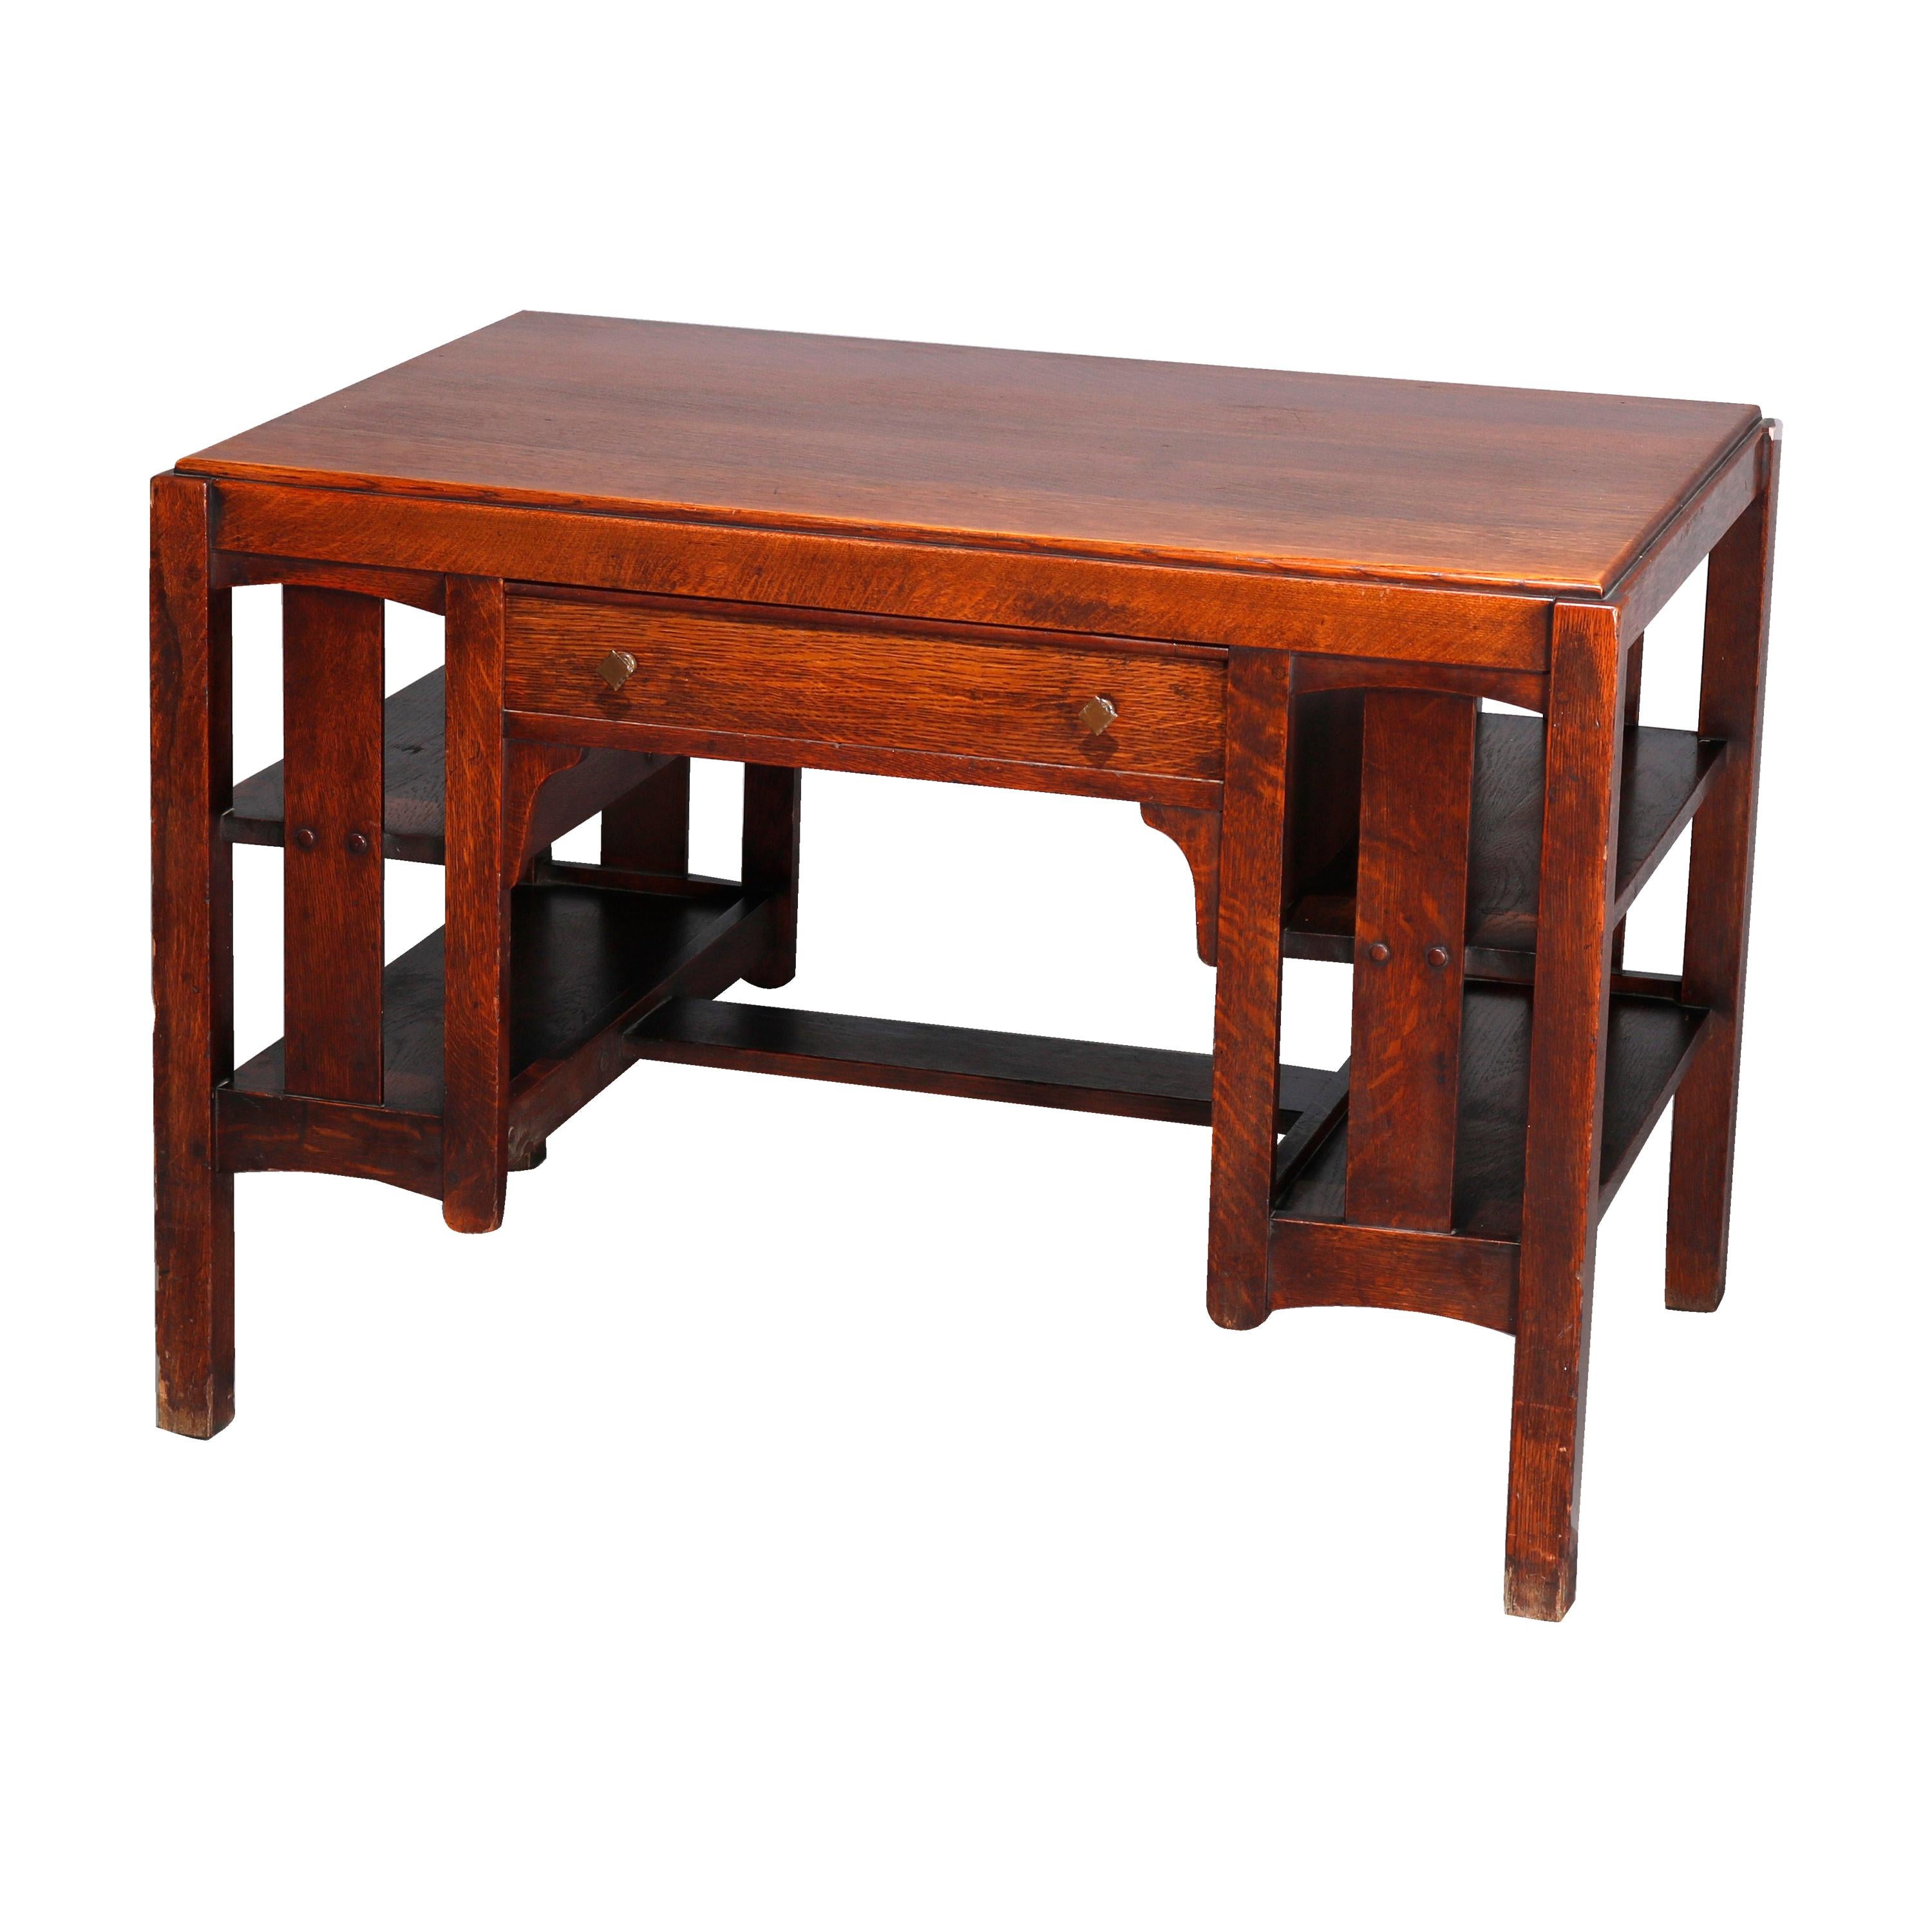 Antique Arts & Crafts Mission Oak Desk, Library Table, by Limbert, circa 1910